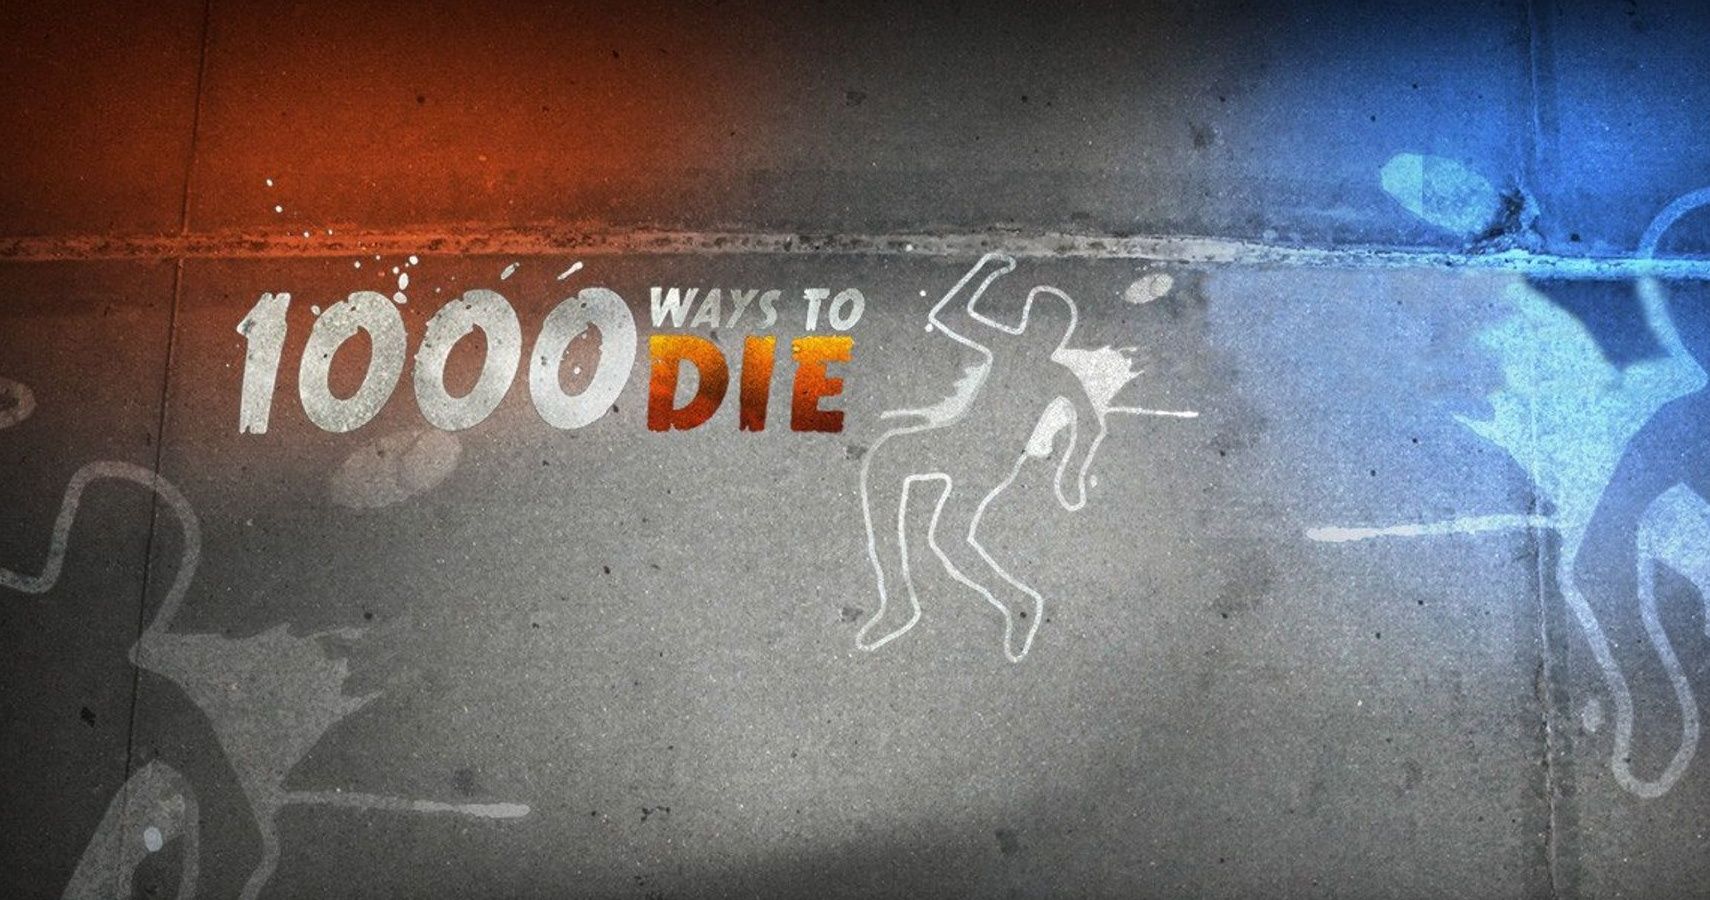 how many videos did 1000 ways to die made